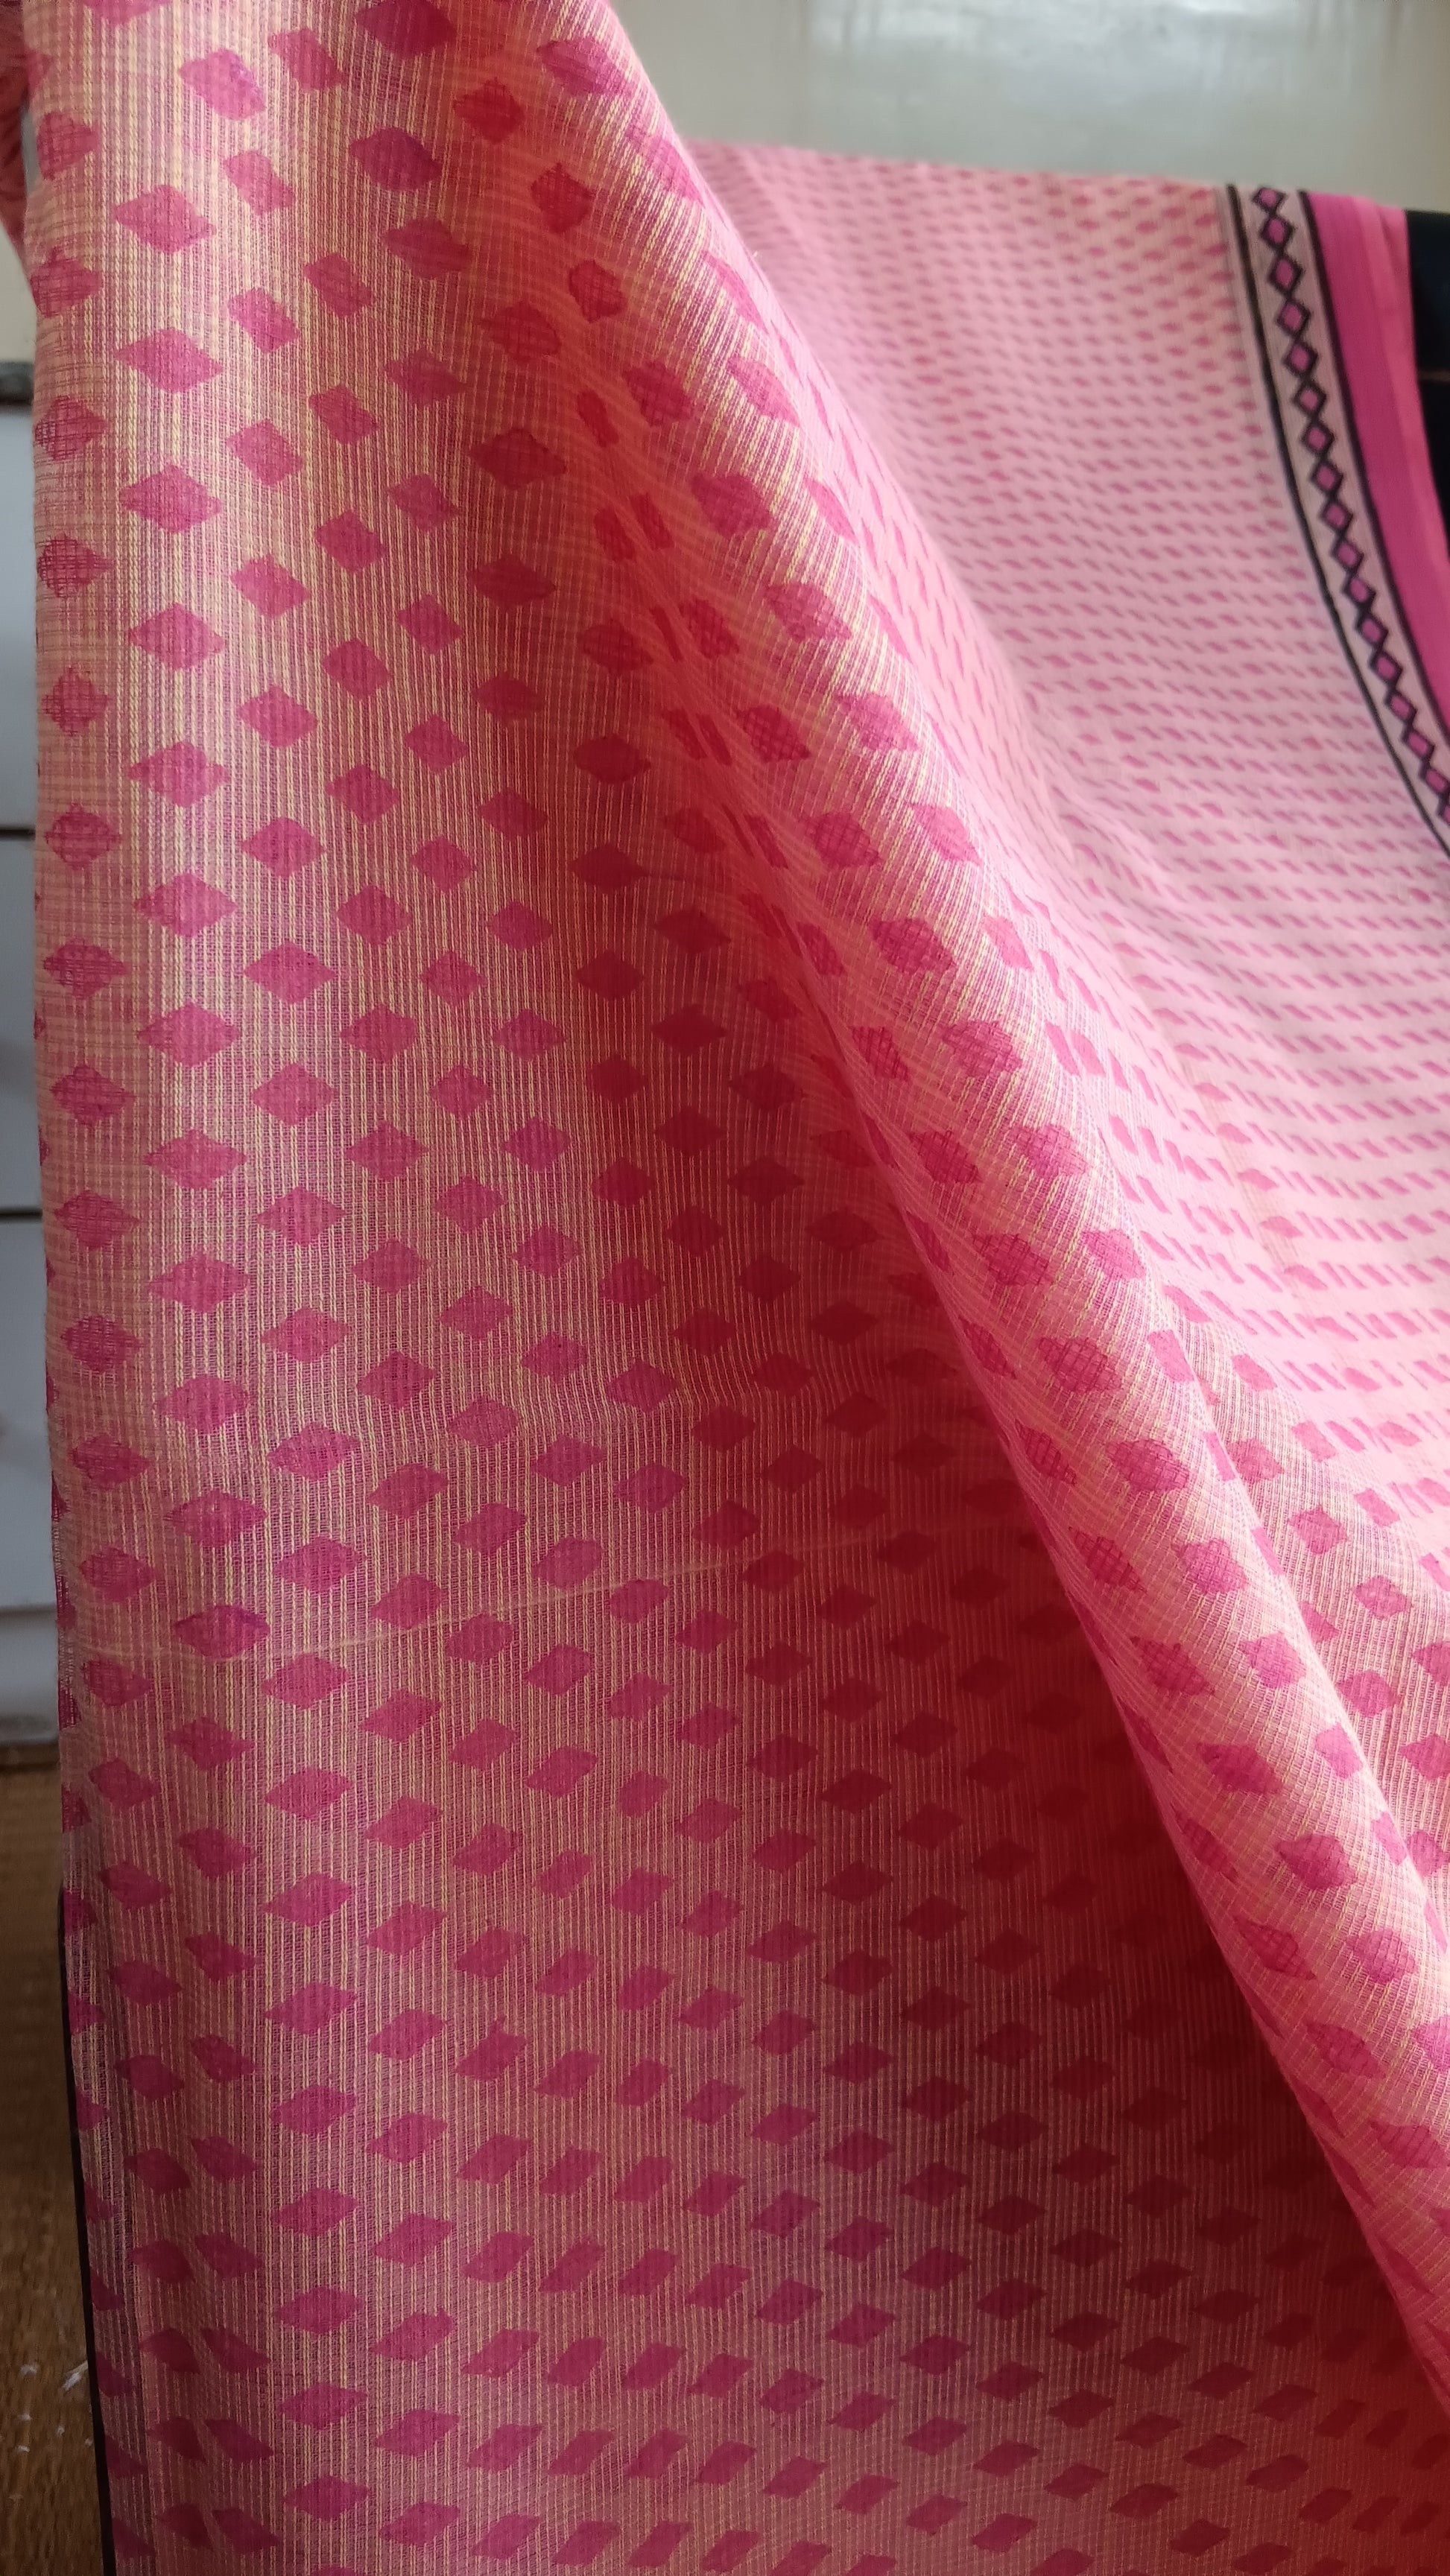 Close up view of the geometric pattern block printed on the body of a light weight daily wear kota cotton saree